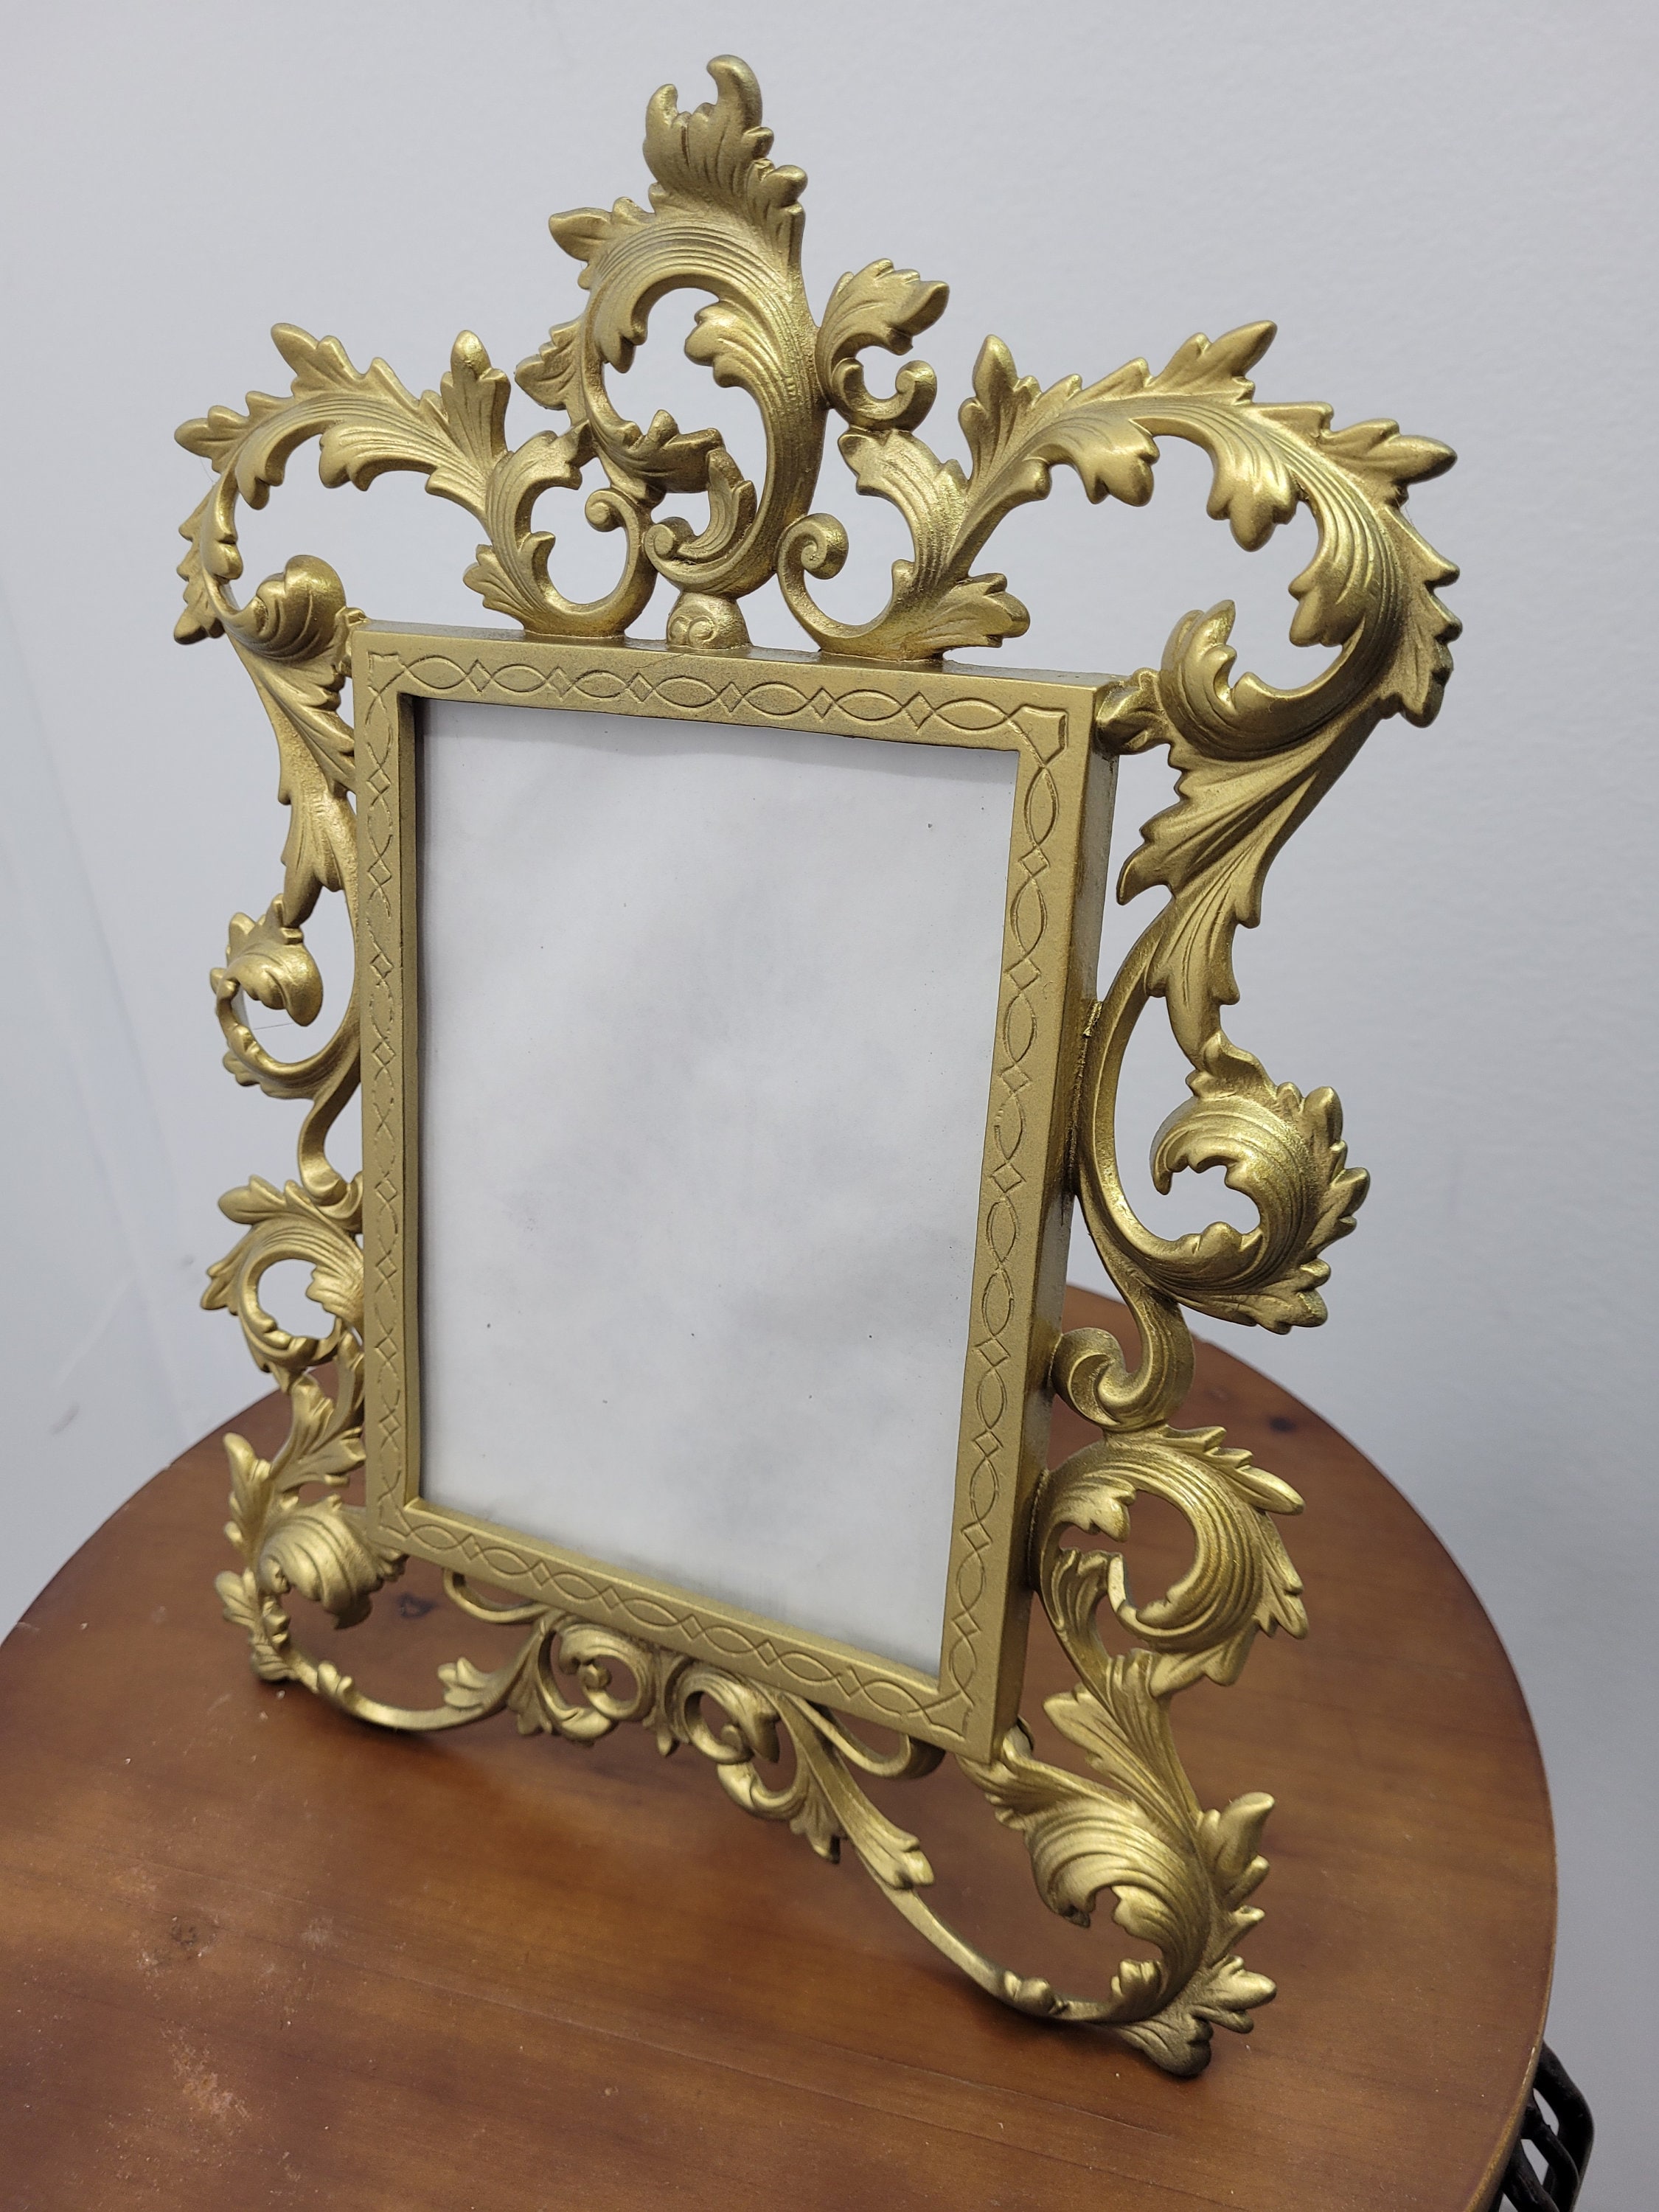 Large Antique Cast Bronze Rococo Revival Portrait or Picture Easel With  Leaves and Flowers